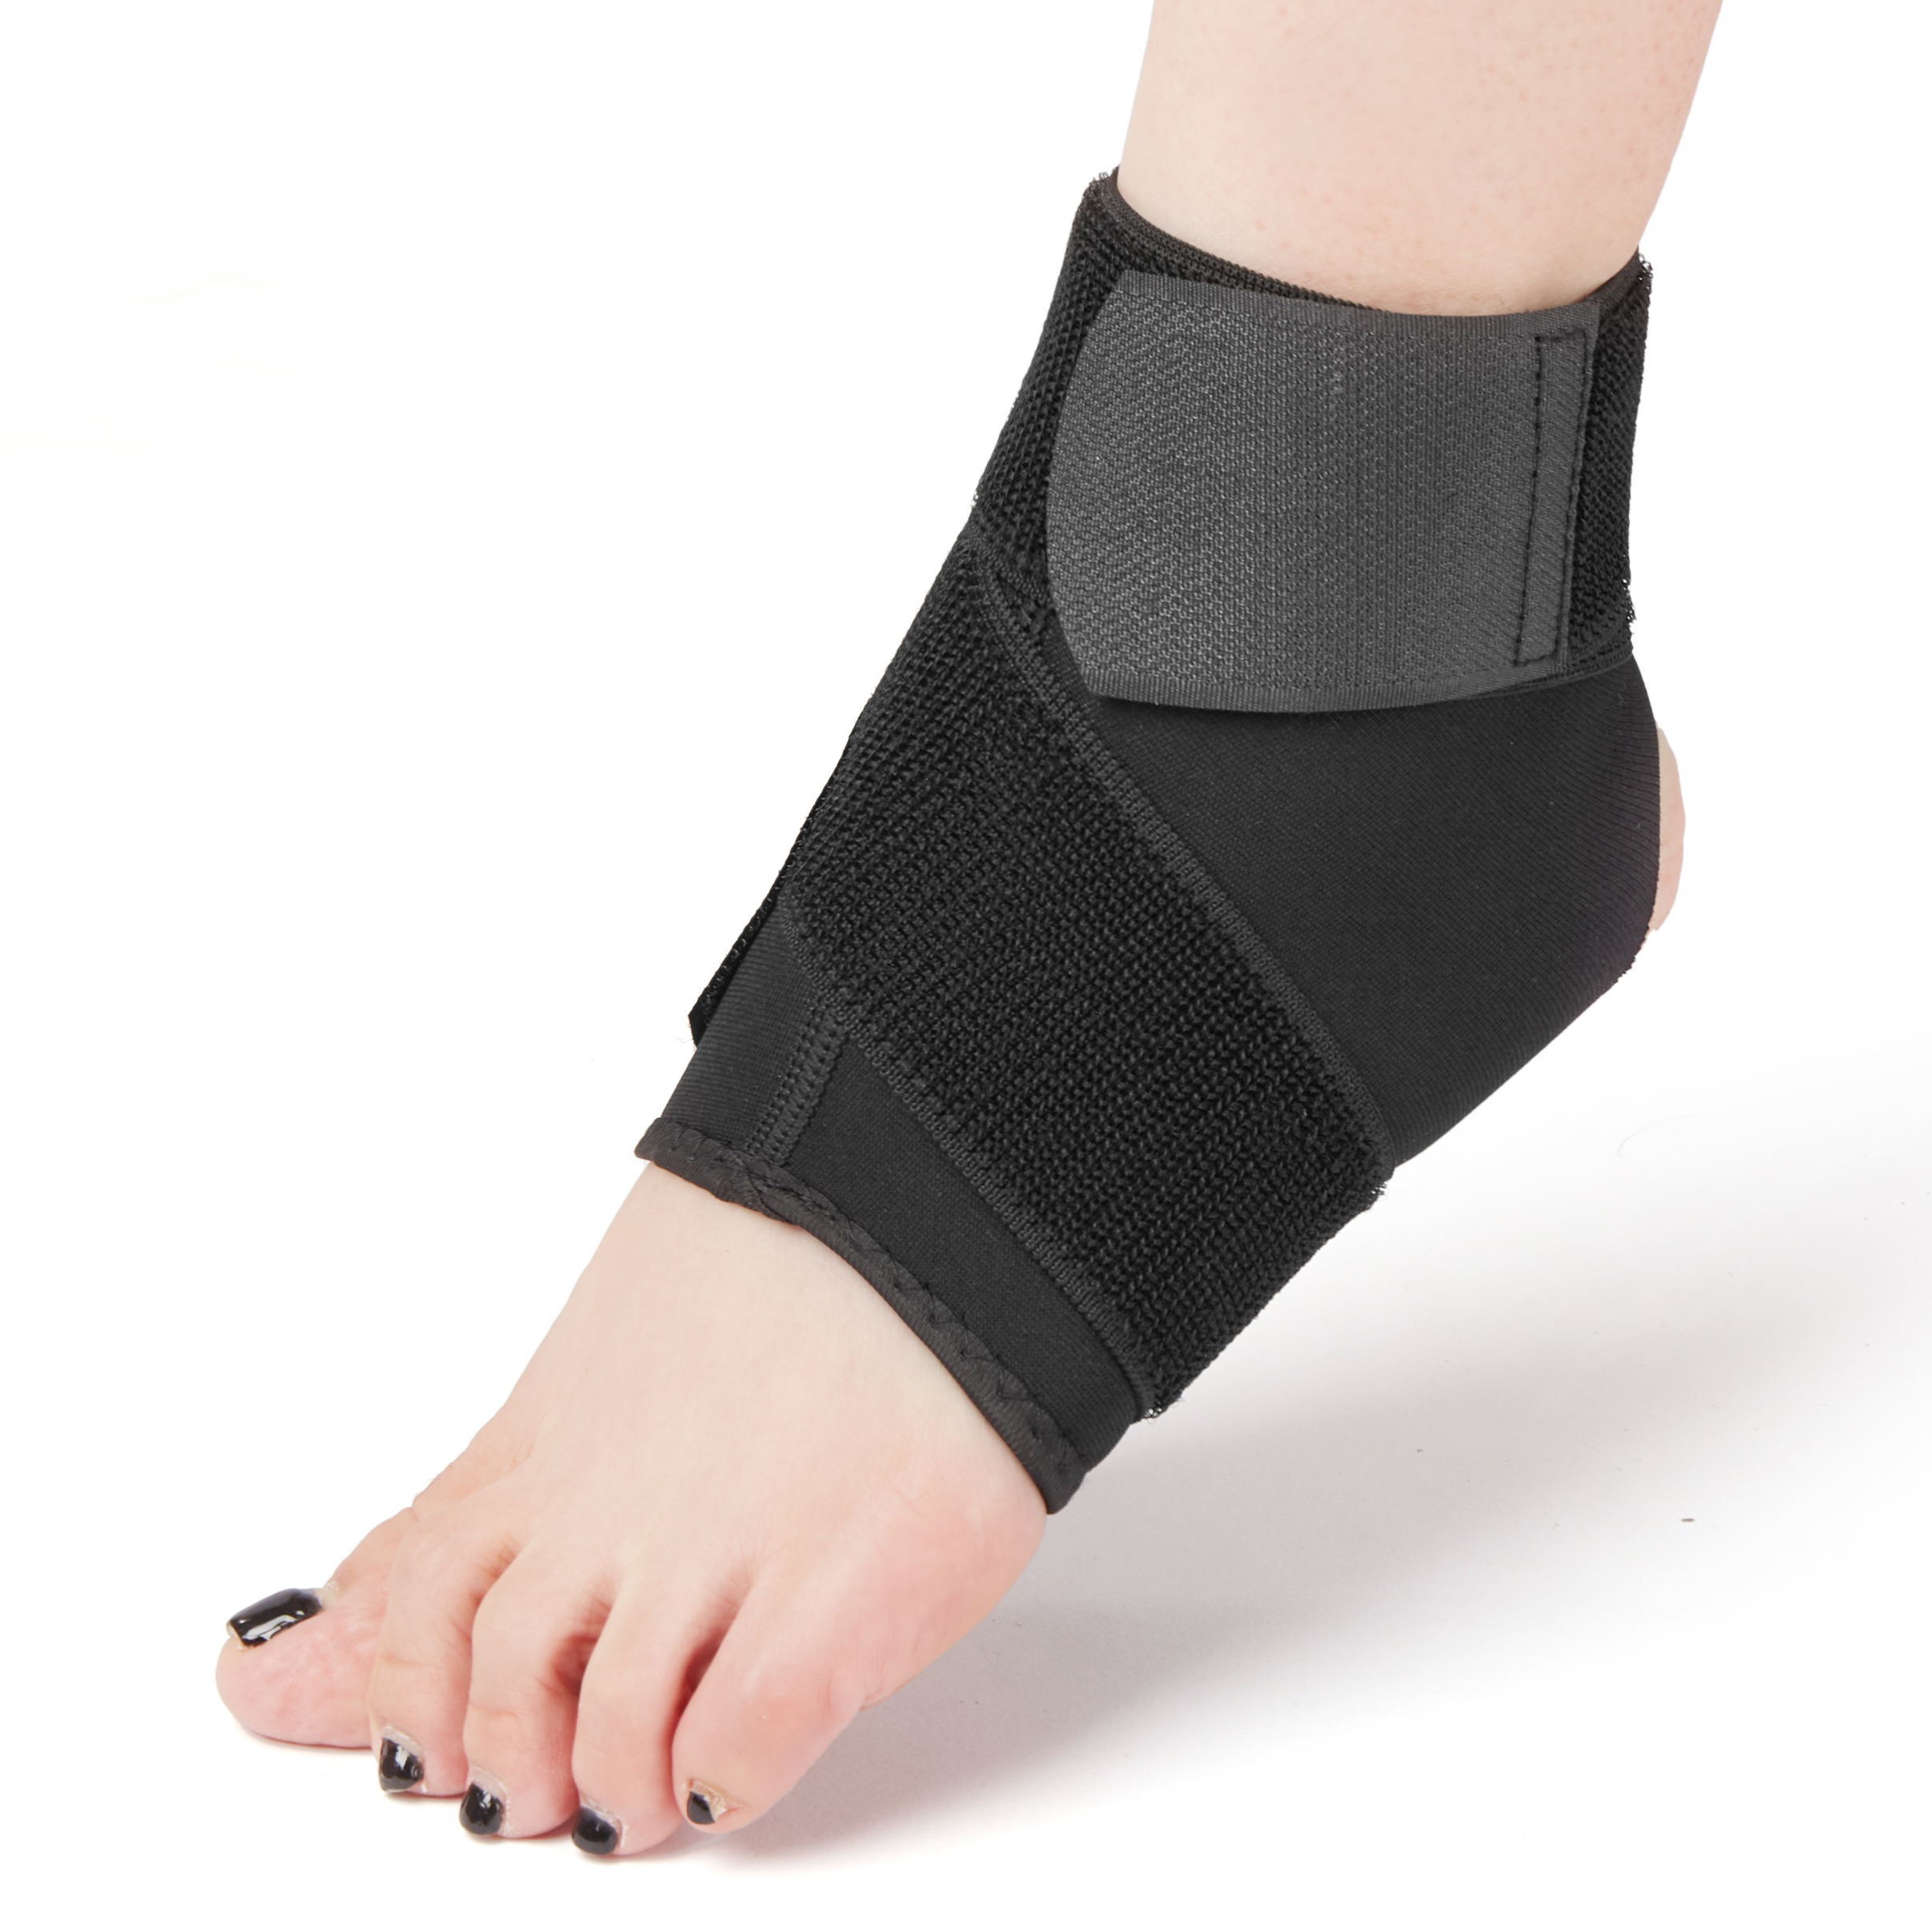 Breathable Neoprene Adjustable Compression Ankle Guard Featured Image